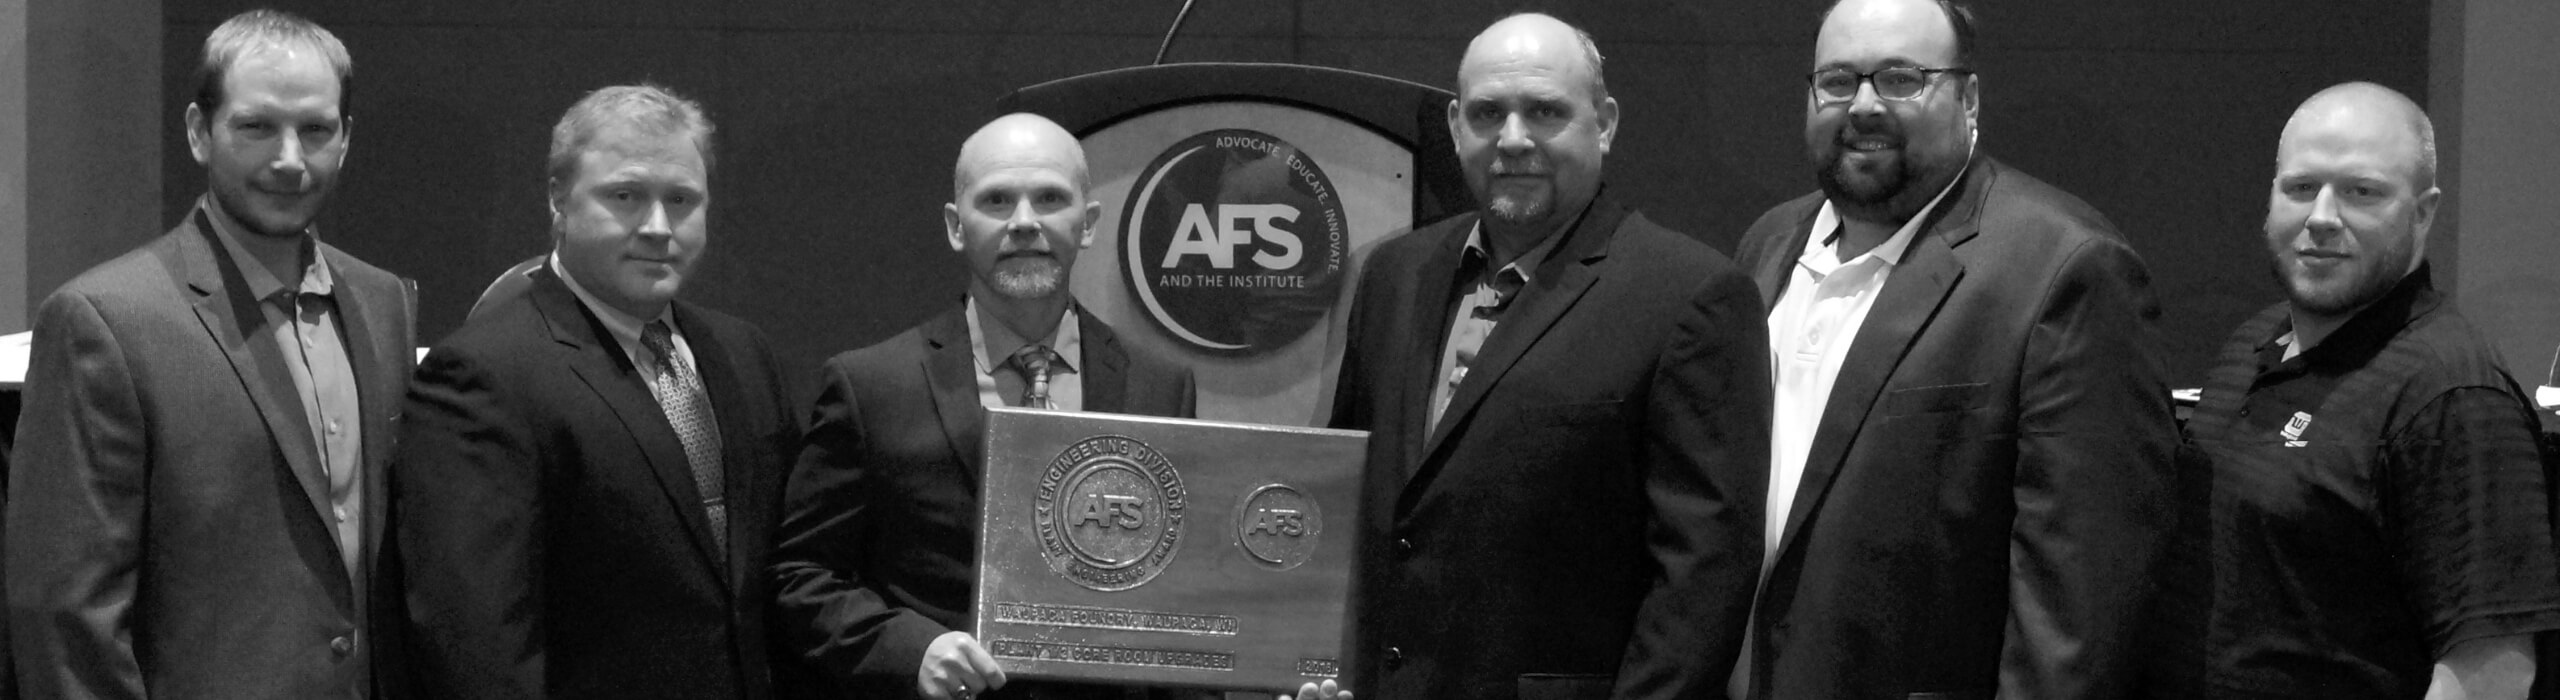 Waupaca Foundry team Earns Industry Awards for Metalcasting Excellence